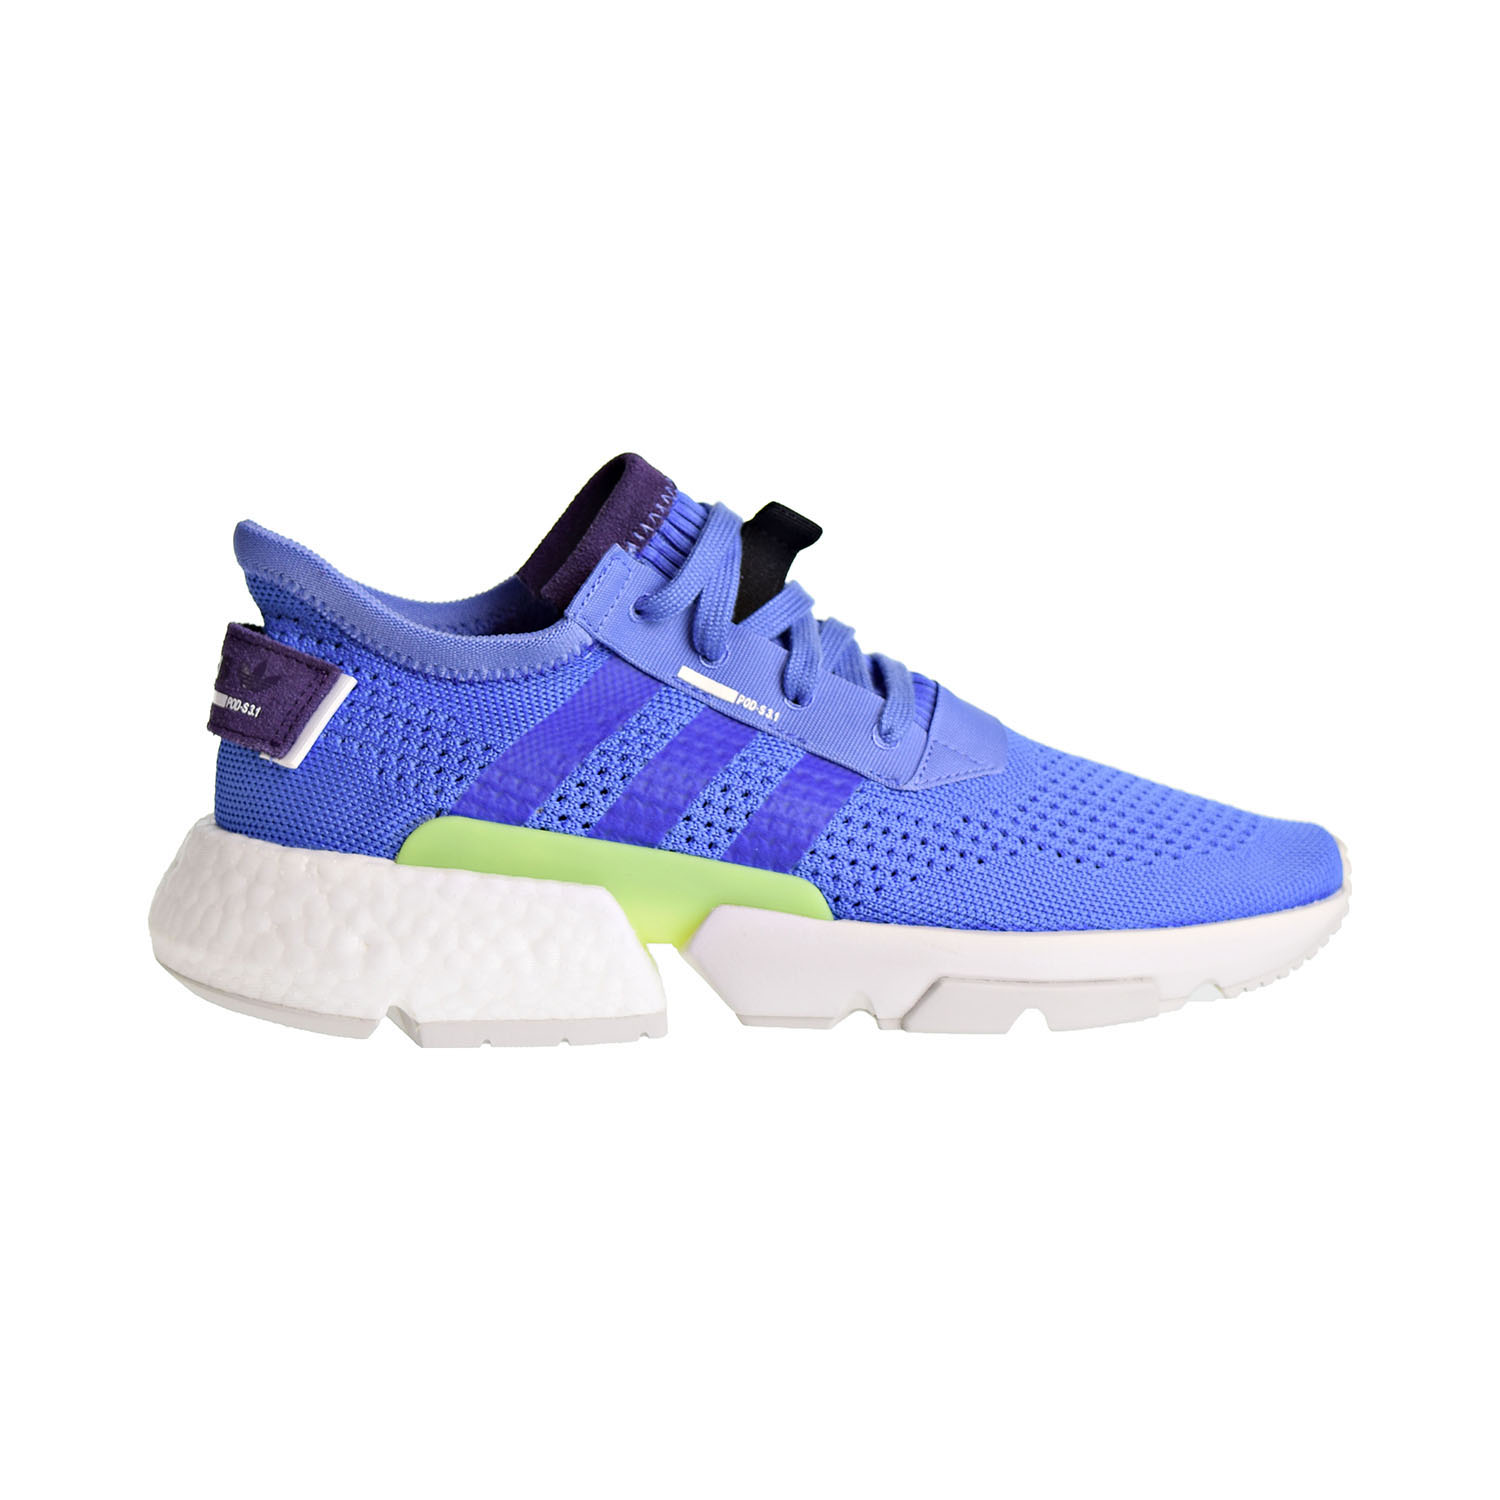 Adidas POD-S3.1 Men's Shoes Real Lilac 